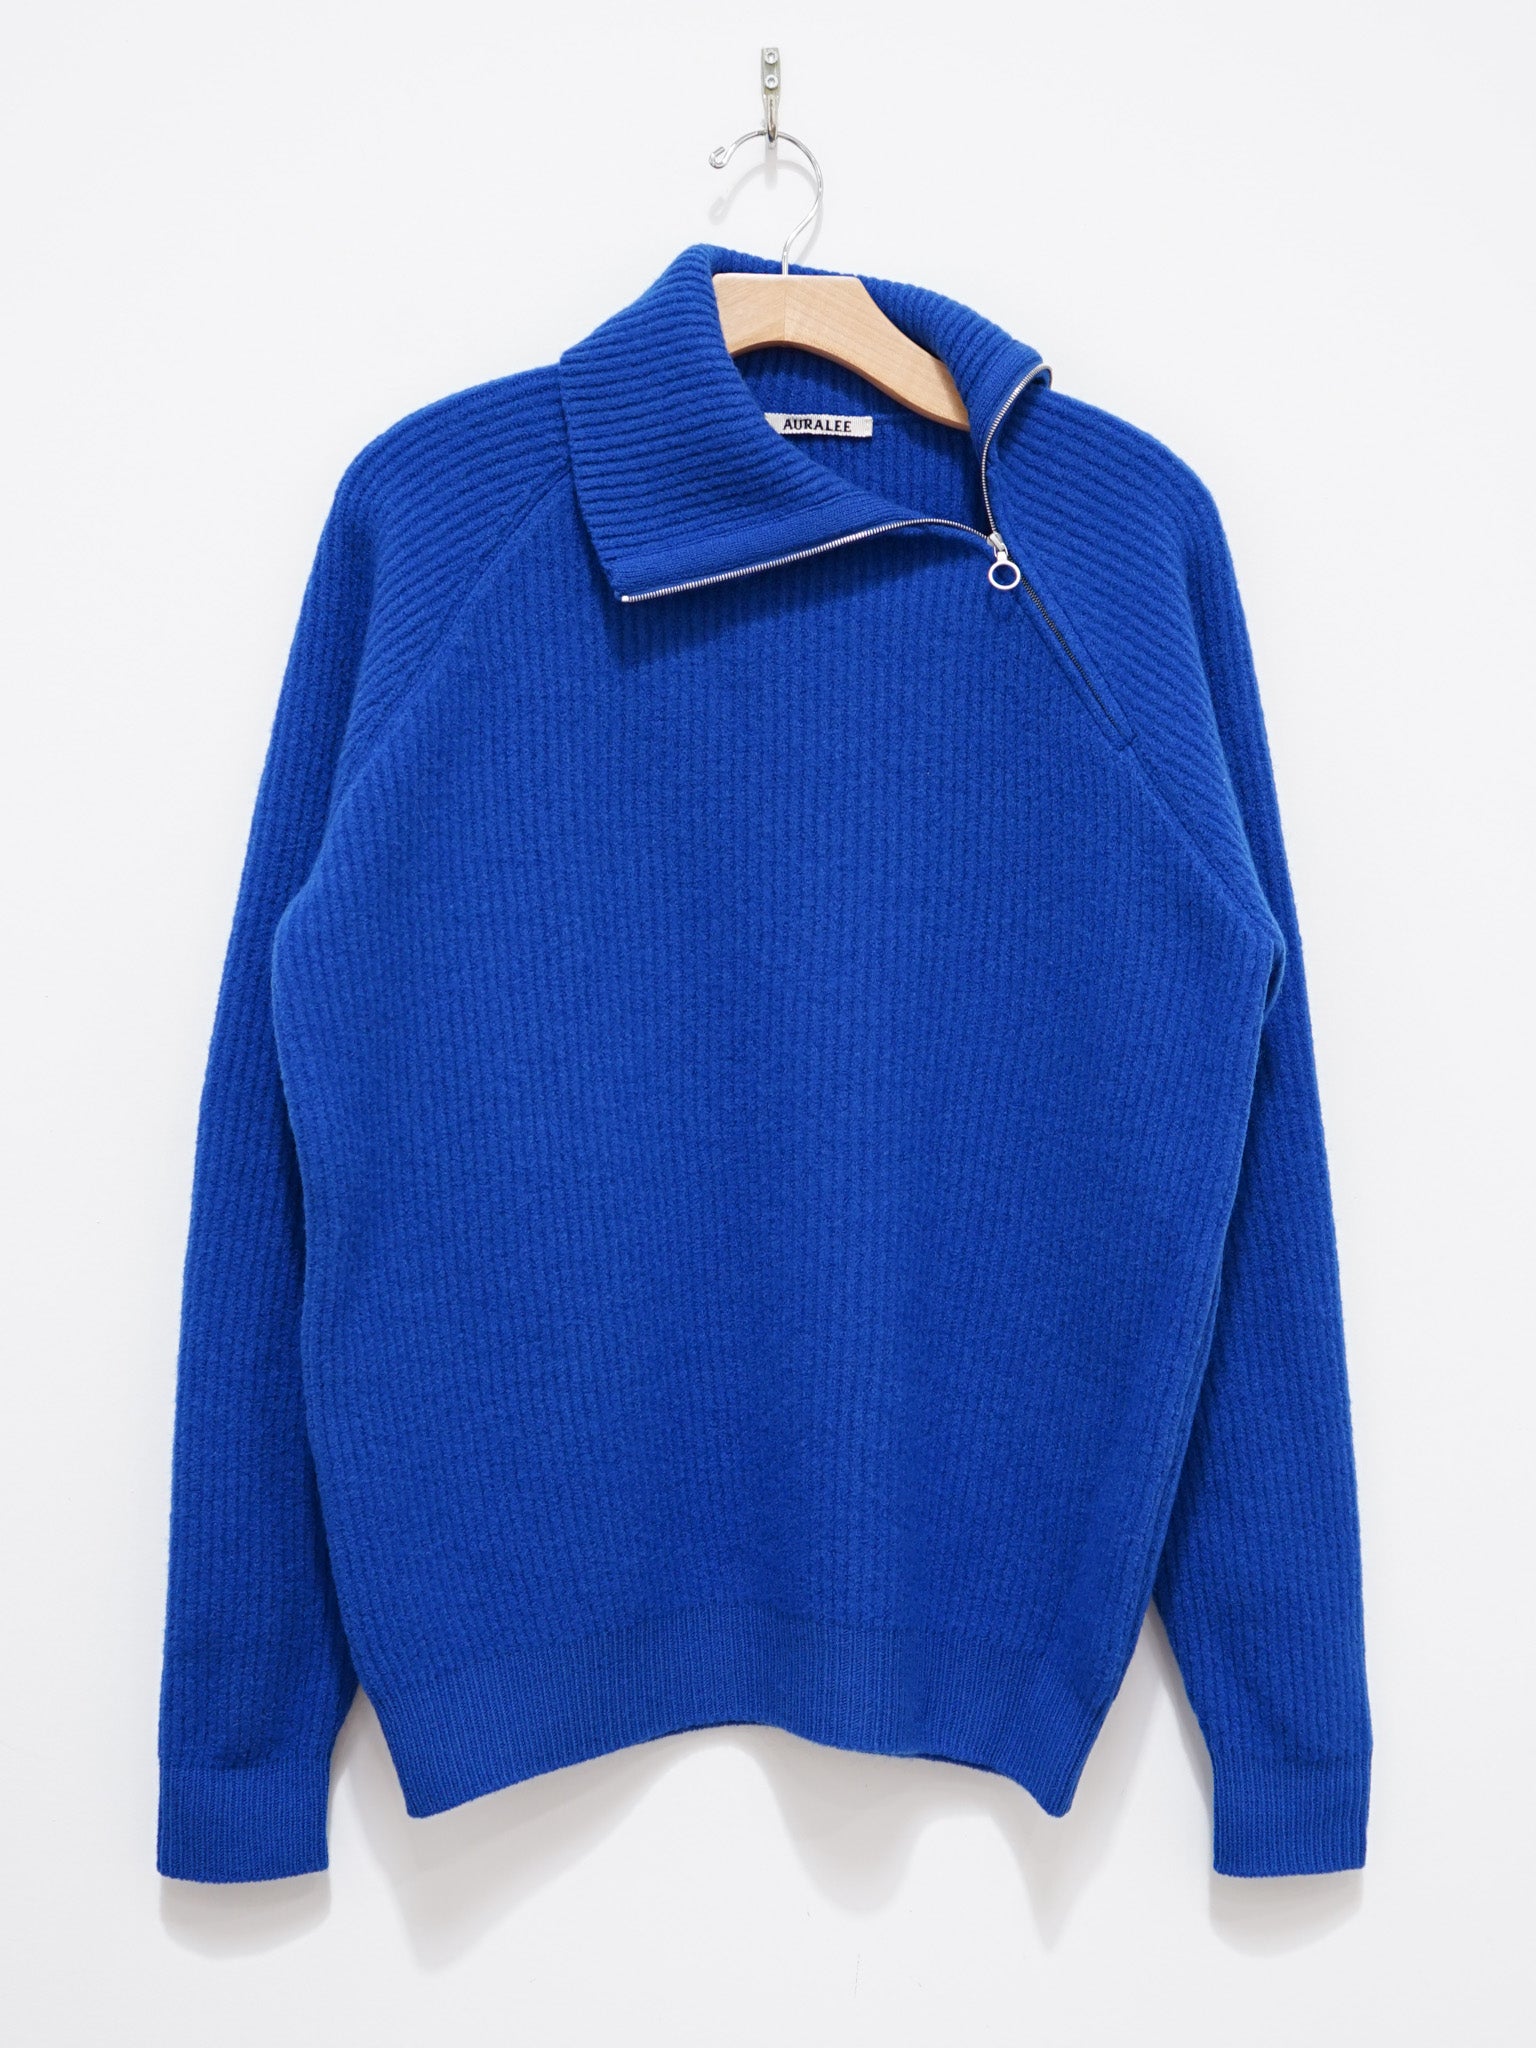 Milled French Merino Rib Knit Zip Pullover - Royal Blue